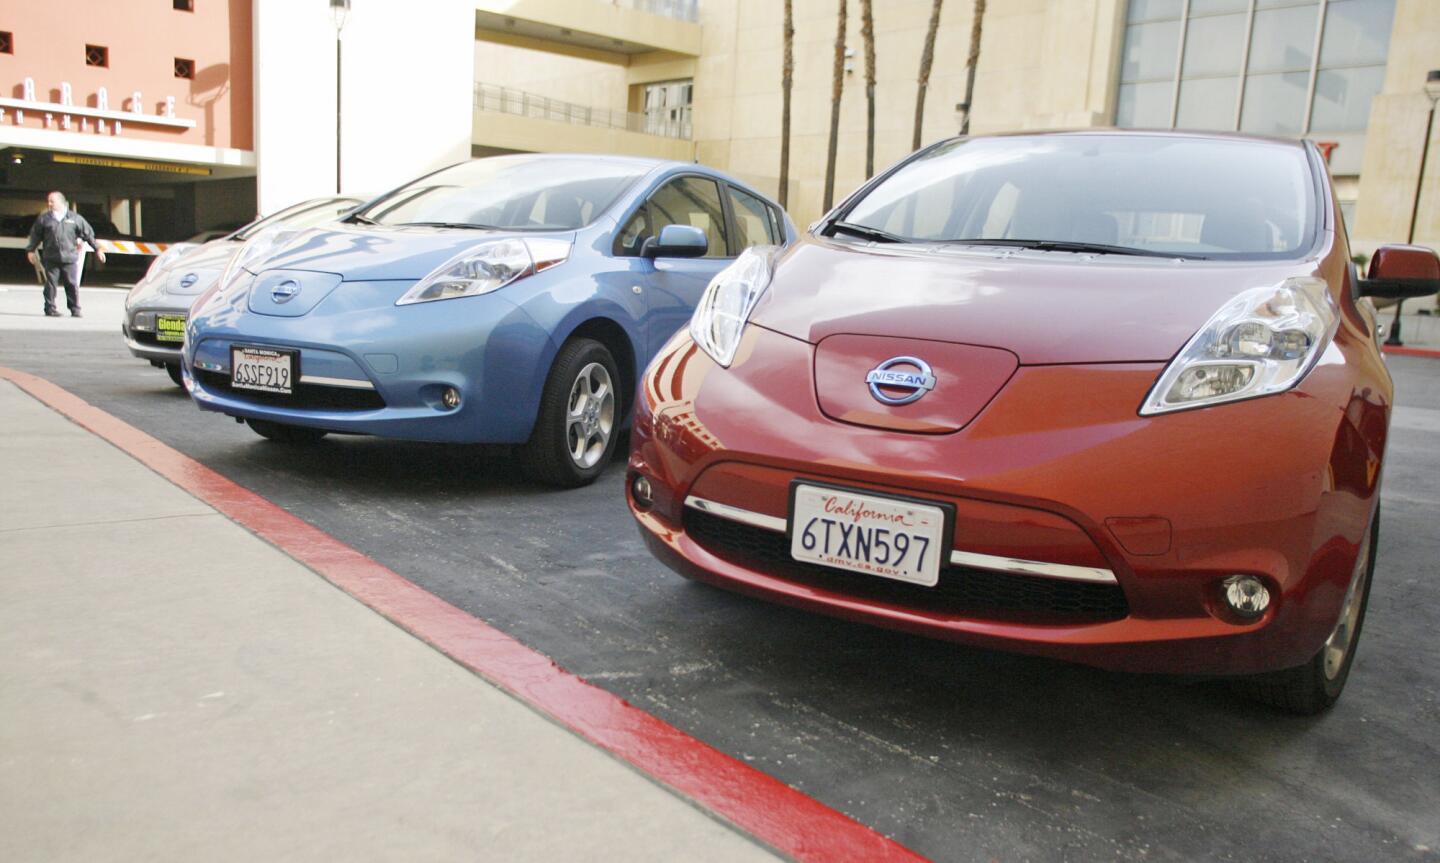 Burbank receives electric charging vehicle stations throughout the city